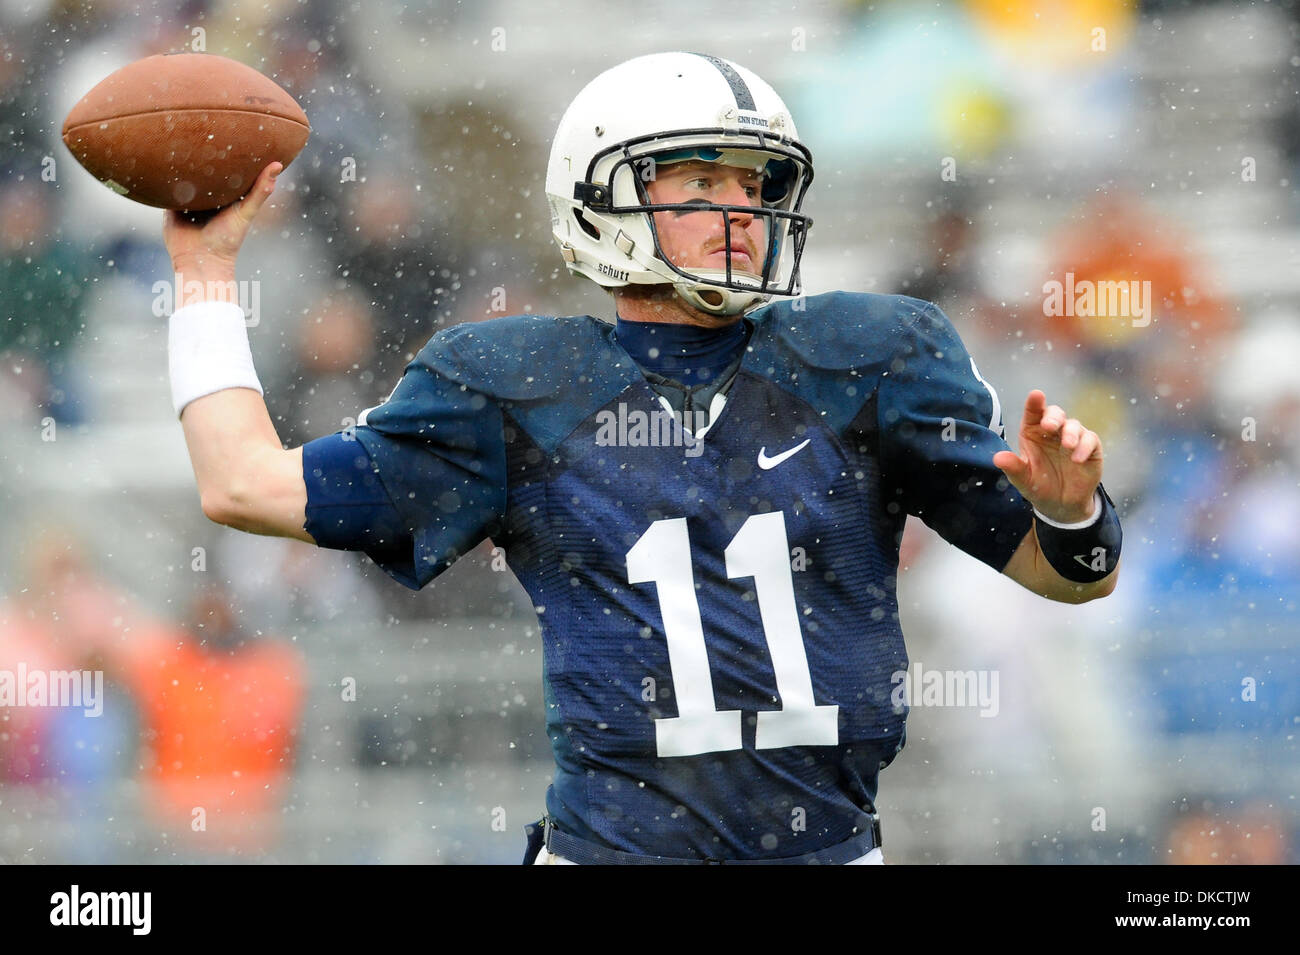 Oct. 29, 2011 - State College, Pennsylvania, United States of America - Penn State quarterback Matt McGloin (11) drops back to pass the ball against the Illinois defense during a Big 10 matchup at Happy Valley.  Penn State and Illinois are scoreless at the half. (Credit Image: © Brian Freed/Southcreek/ZUMAPRESS.com) Stock Photo